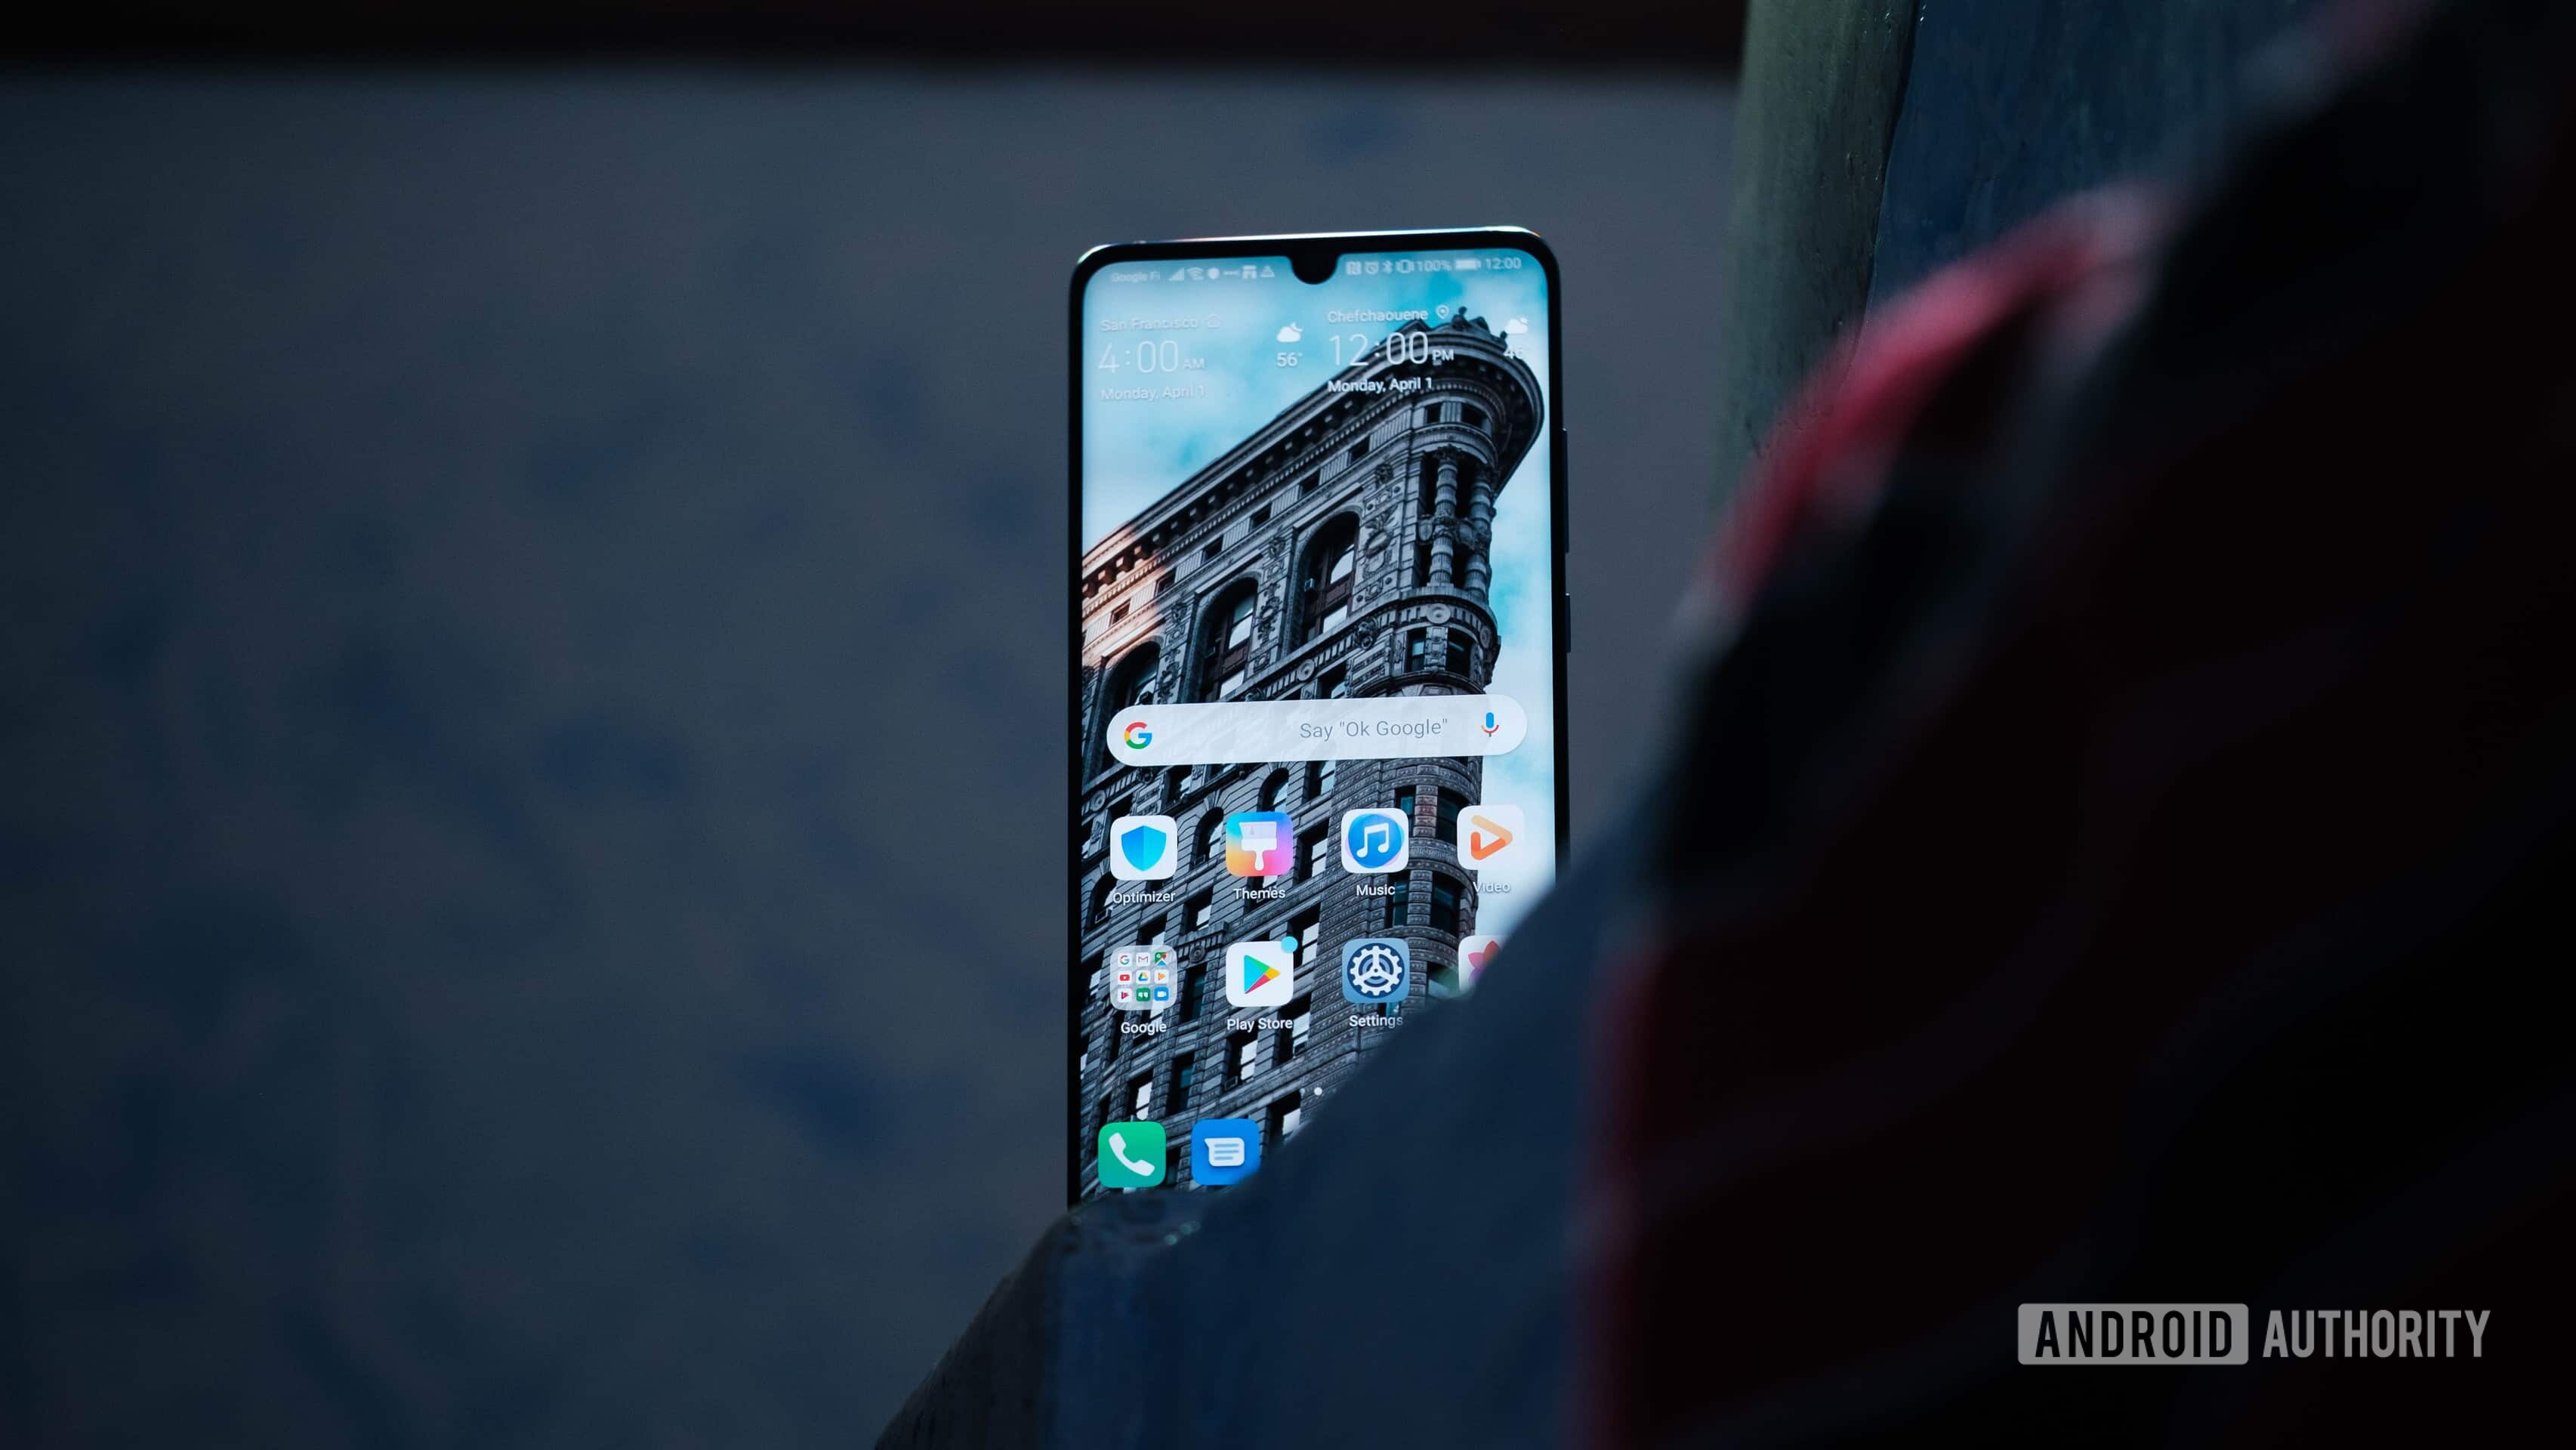 HUAWEI working on EMUI 10 based on Android Q, P30 Pro software leaks